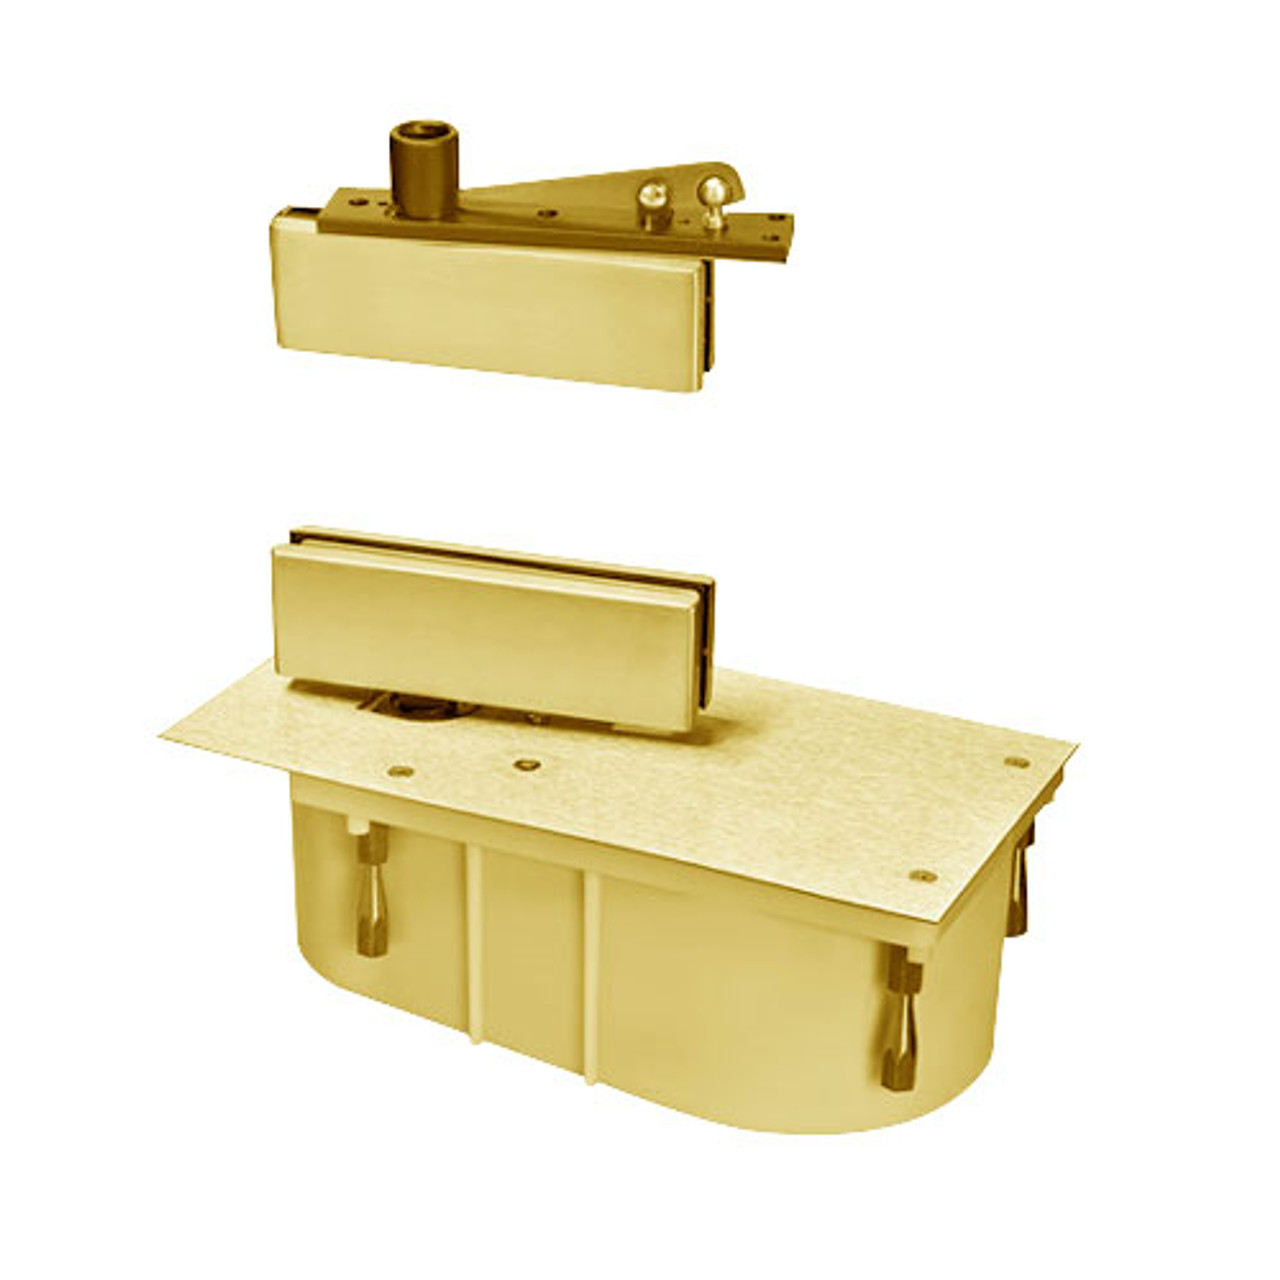 428-95N-RH-605 Rixson 428 Series Heavy Duty Single Acting Center Hung Floor Closer with Patch Fittings in Bright Brass Finish